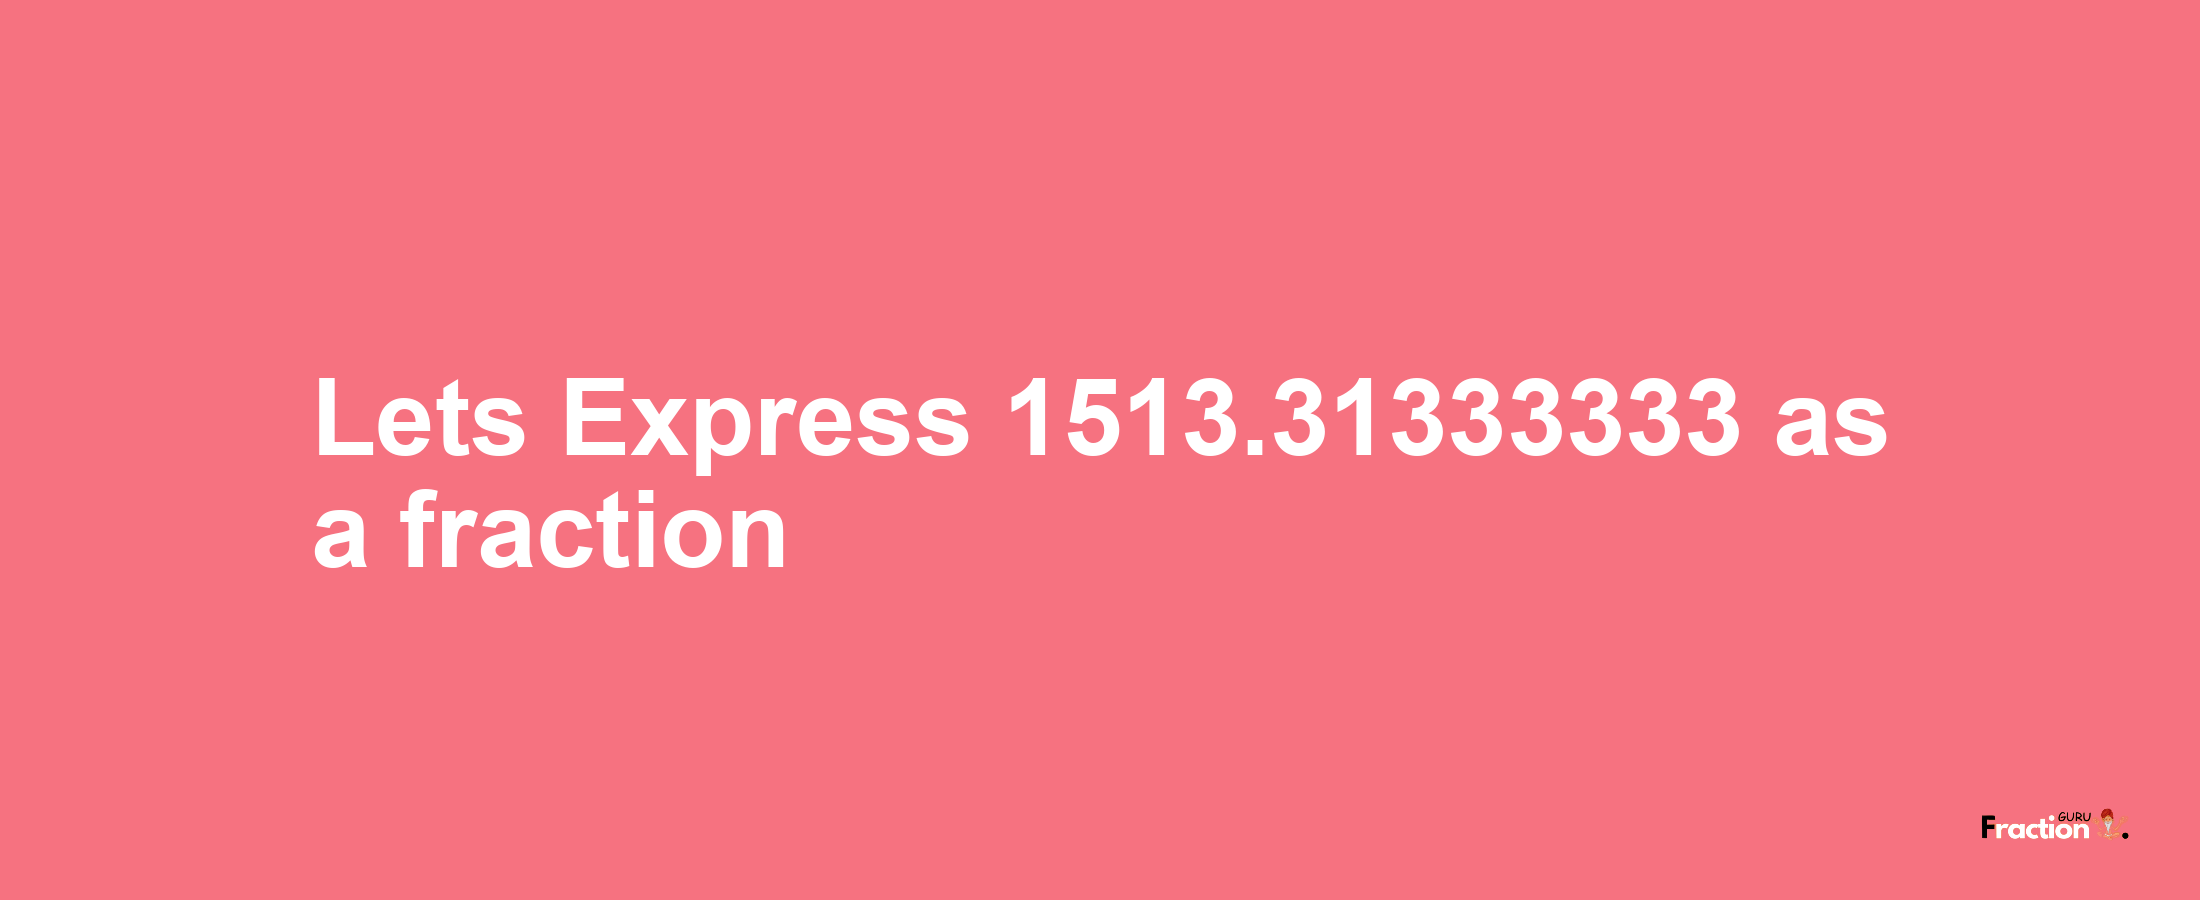 Lets Express 1513.31333333 as afraction